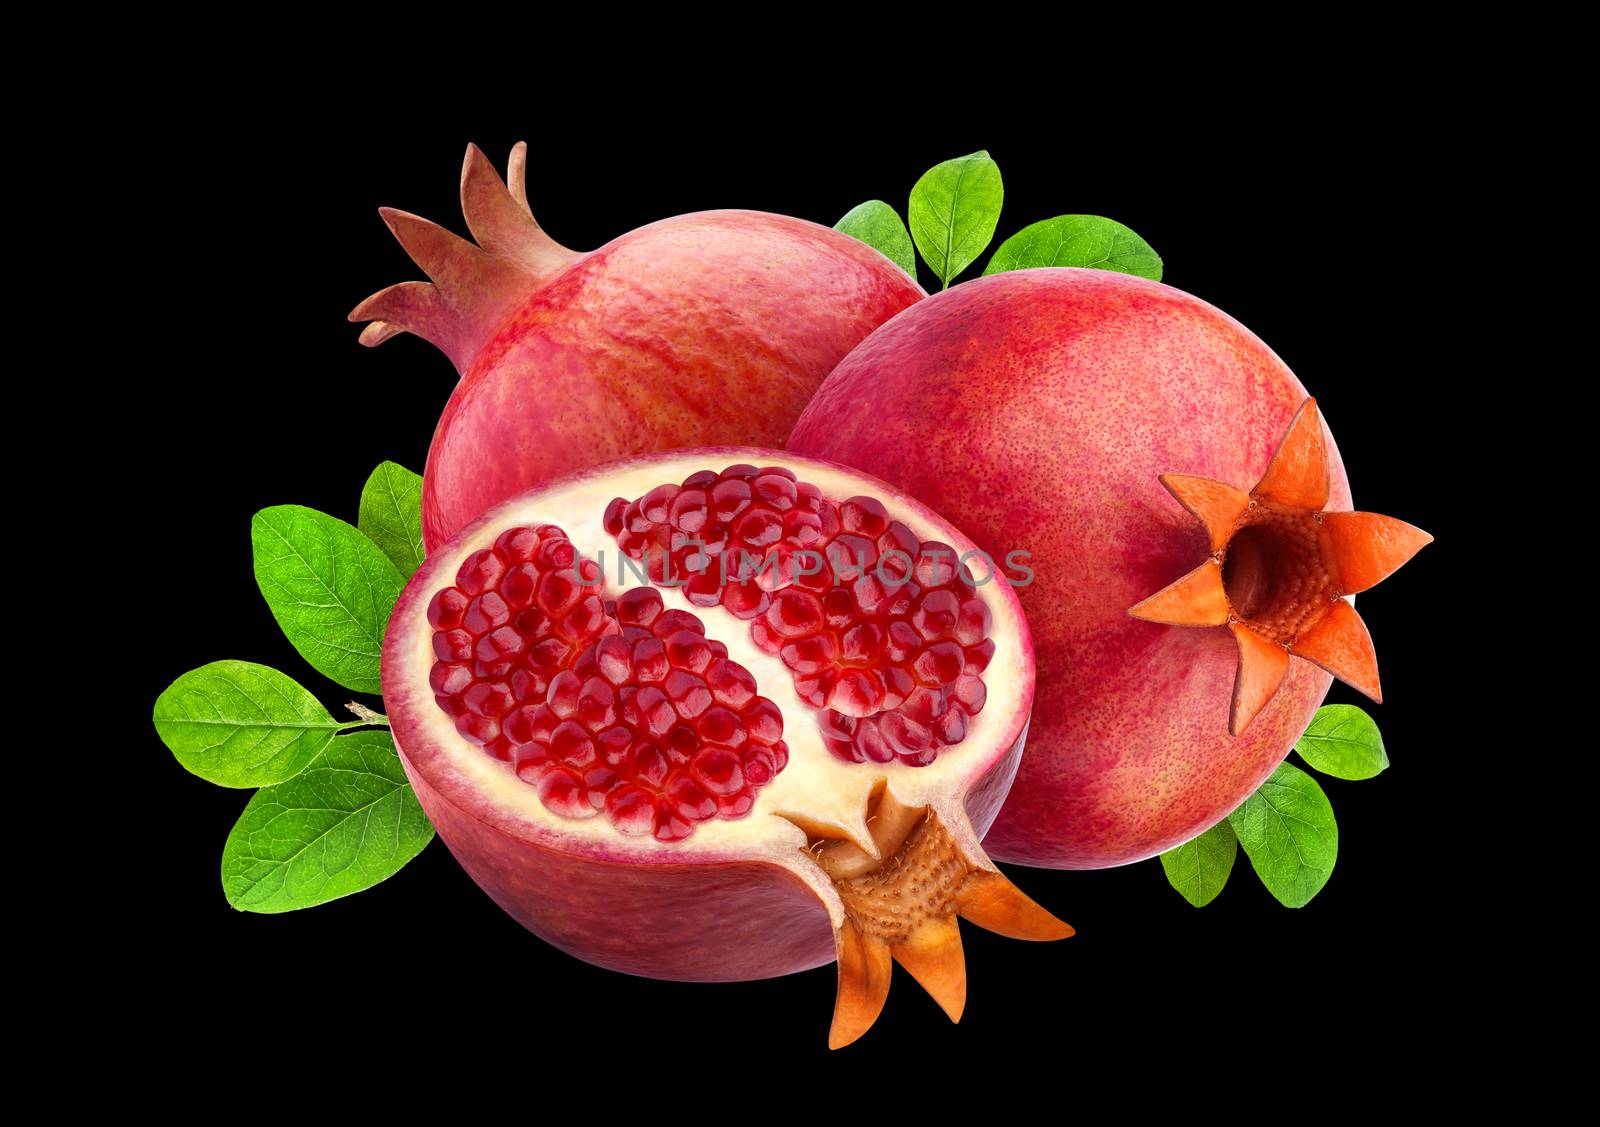 Pomegranate isolated on black background with clipping path by xamtiw